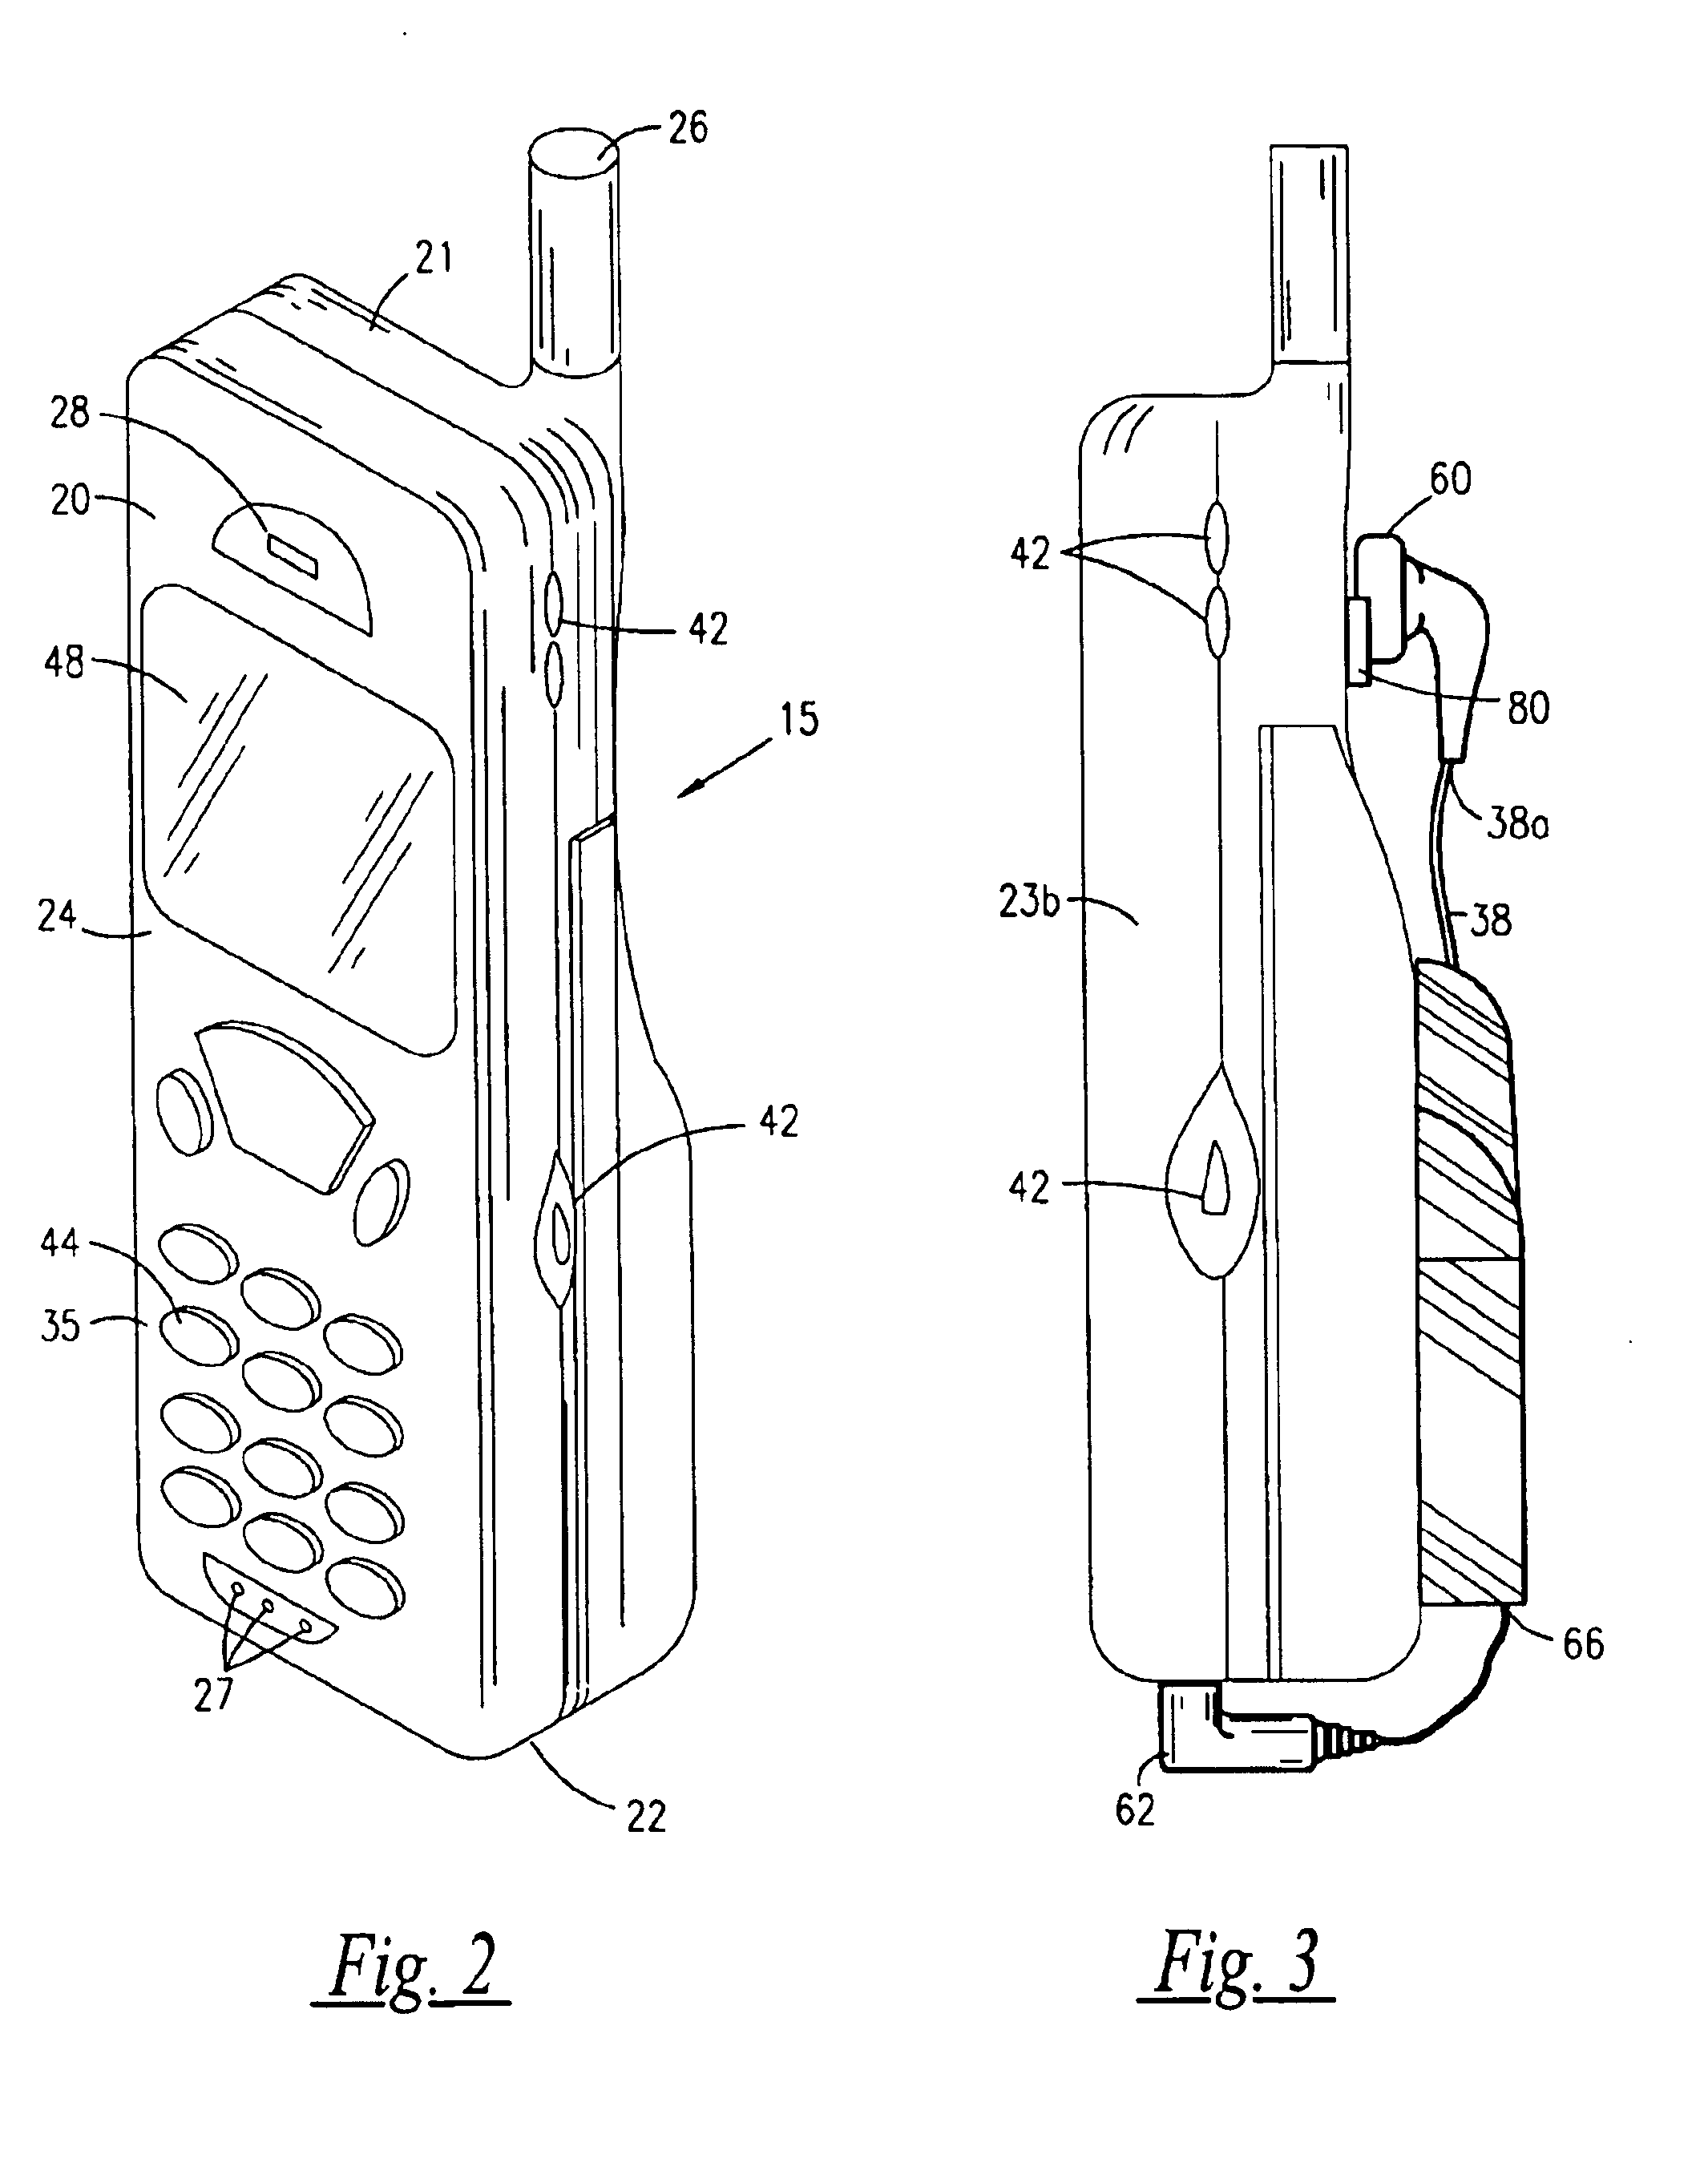 Cellular communication device with integral headset retraction assembly